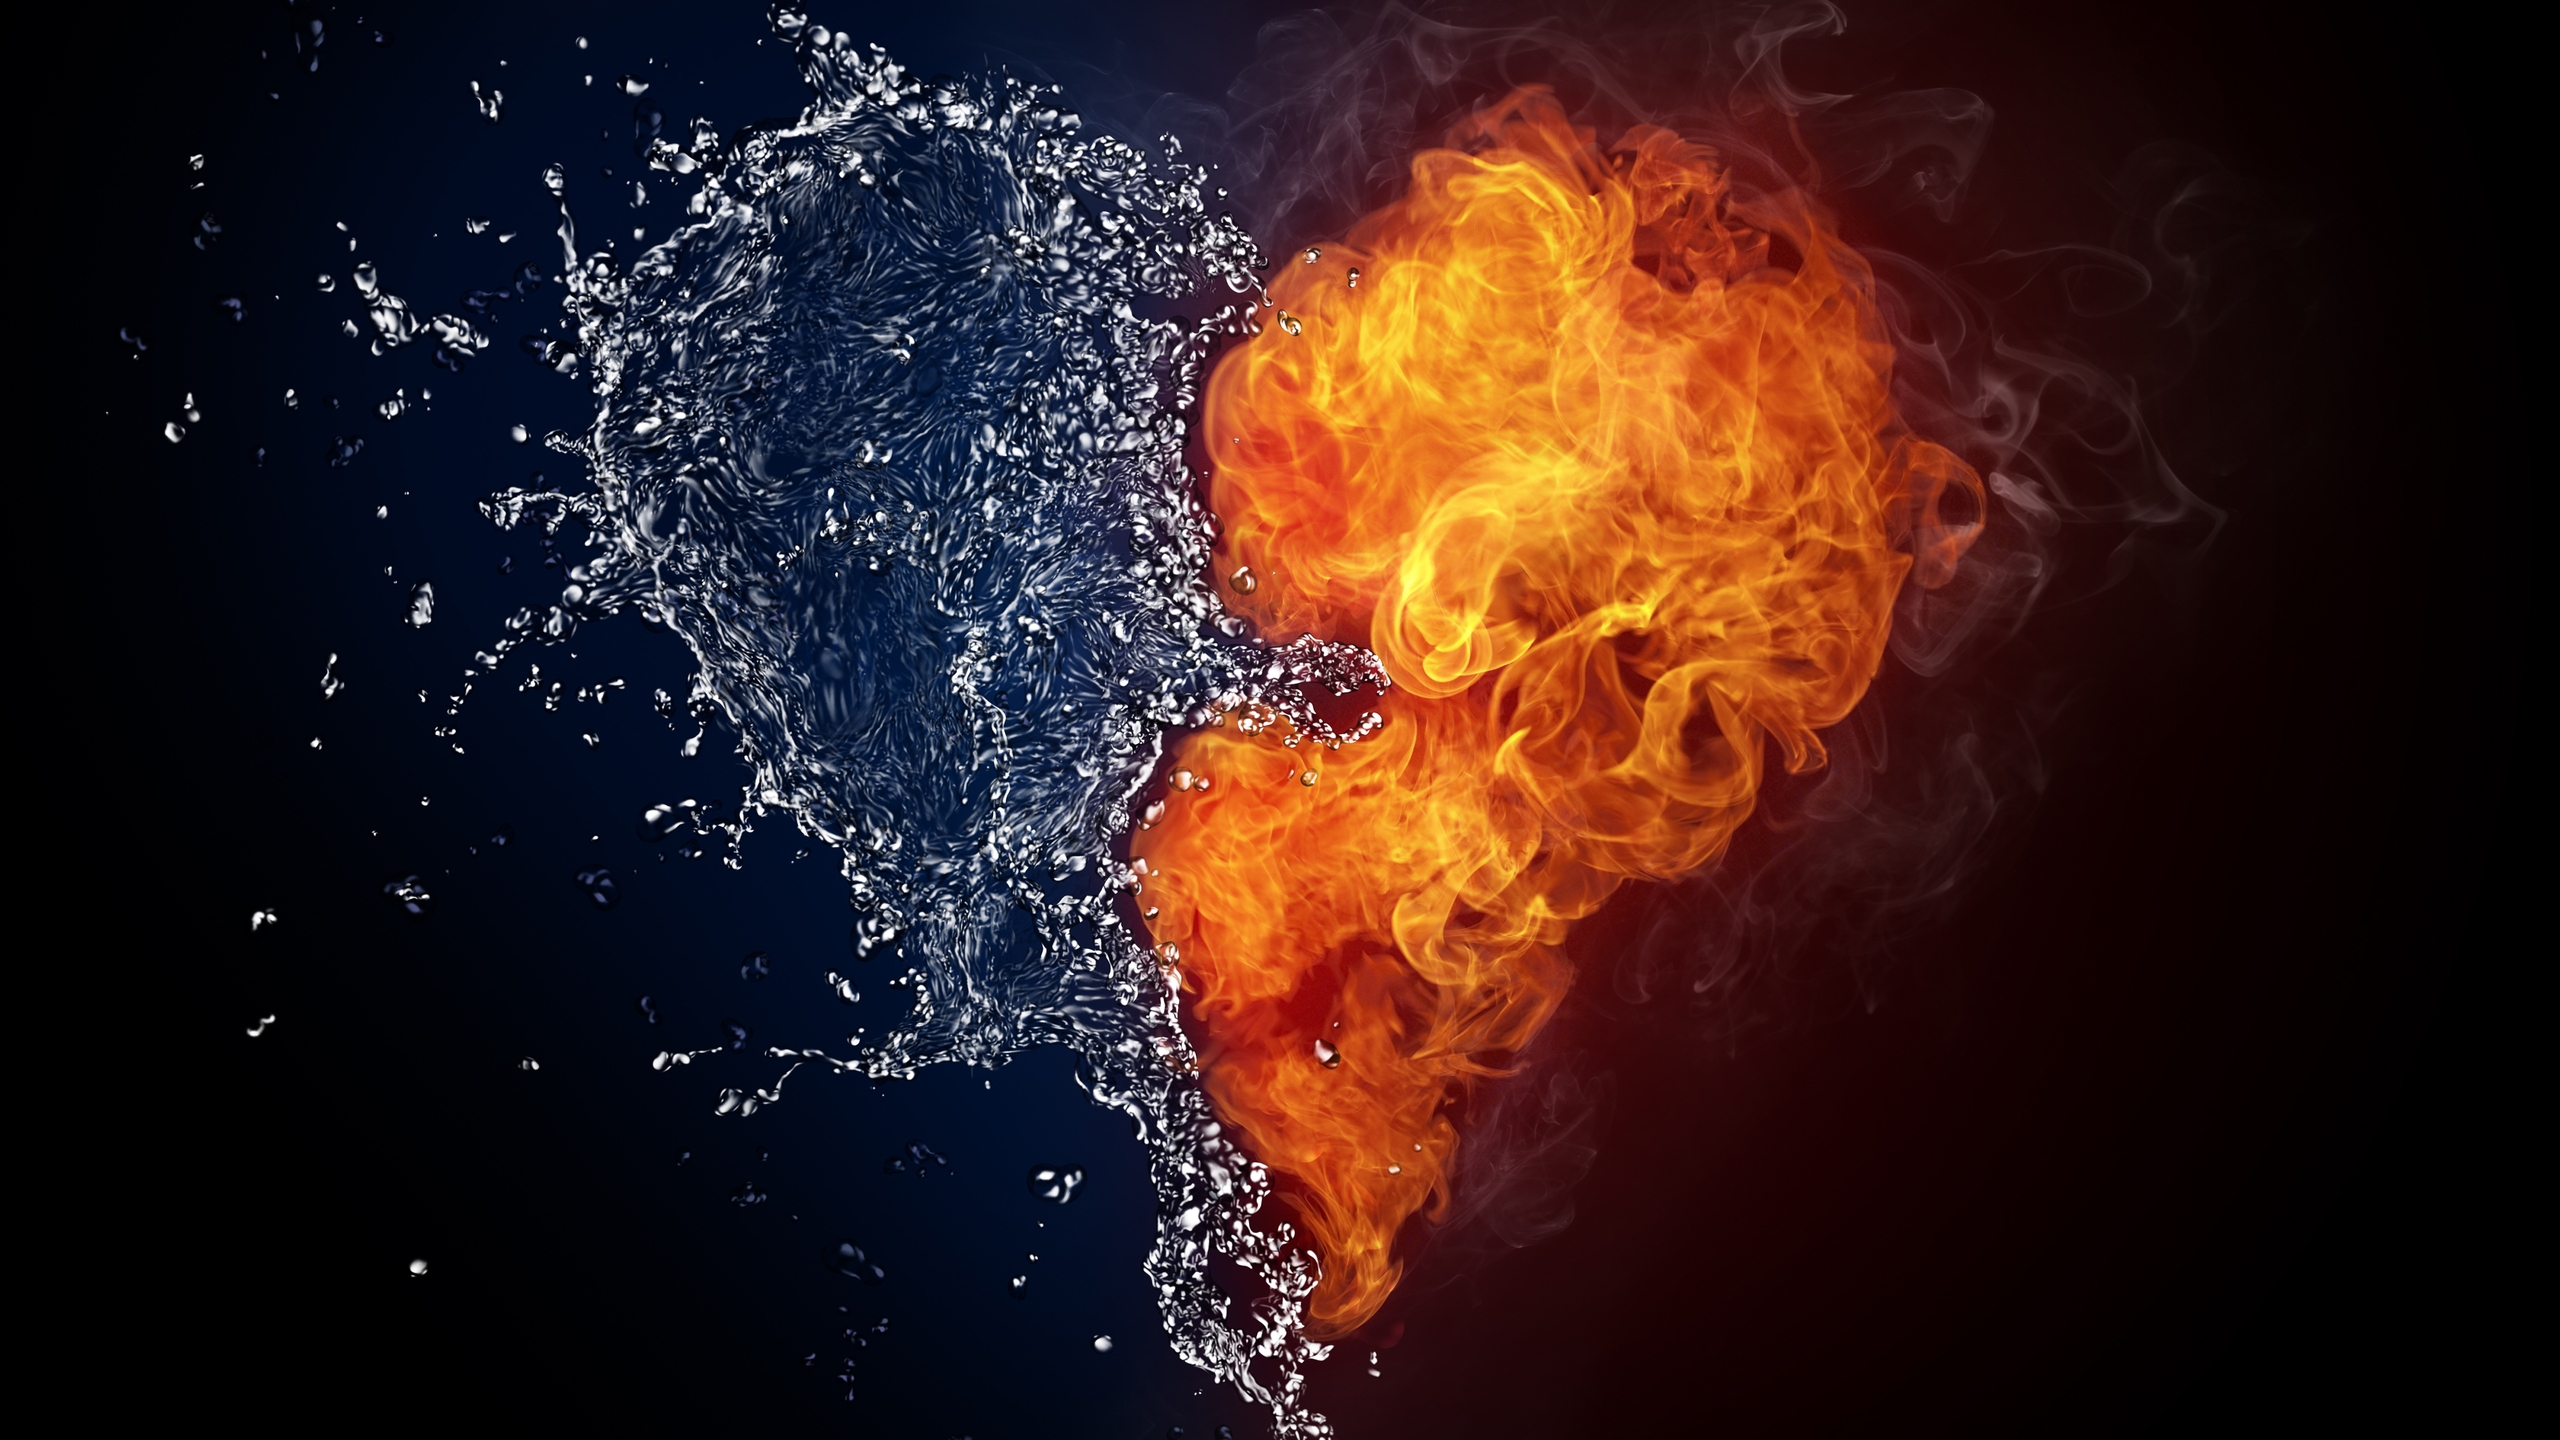 Water and Fire Love for 2560x1440 HDTV resolution